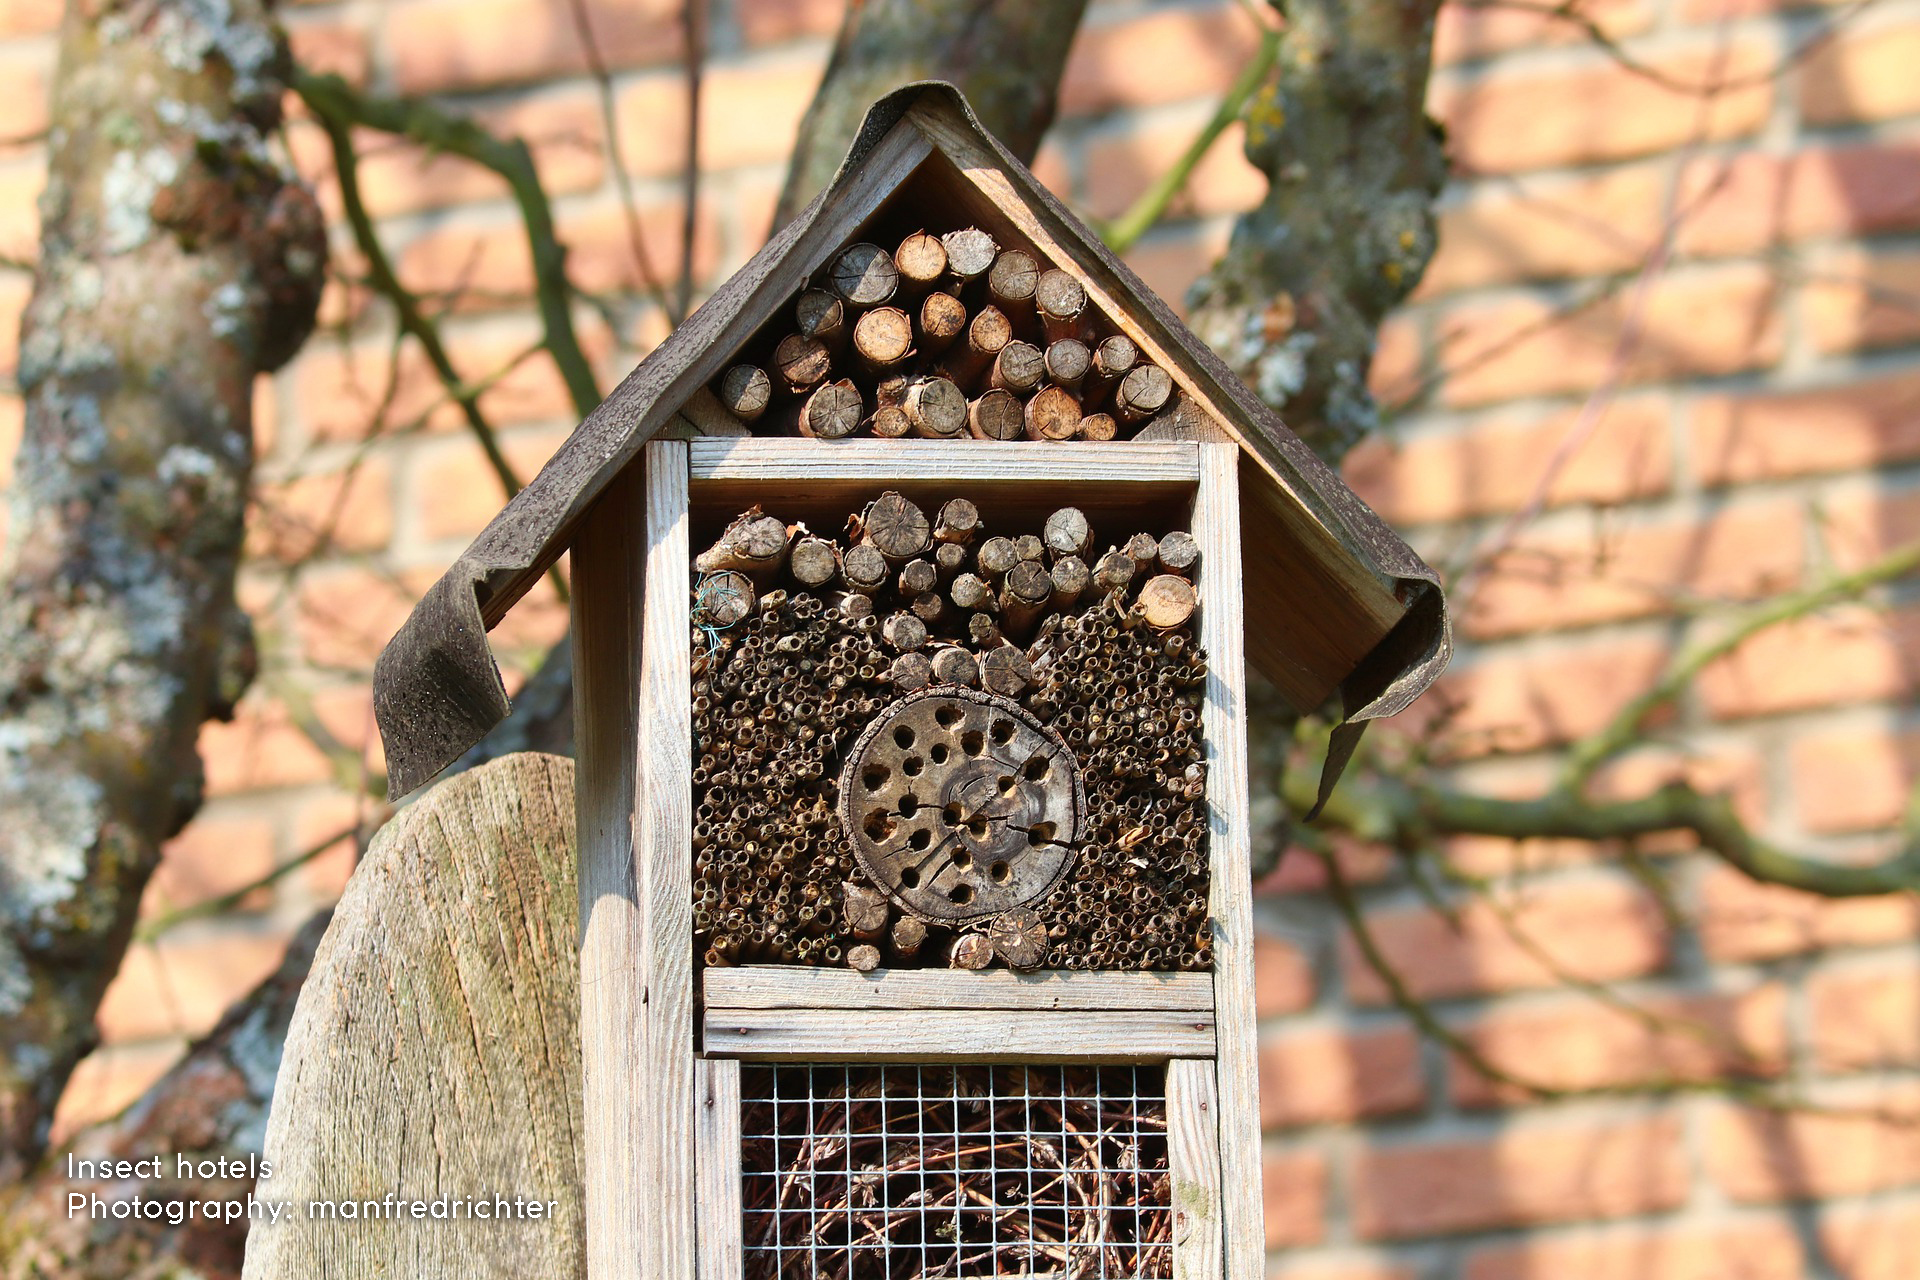 INSECT HOTELS